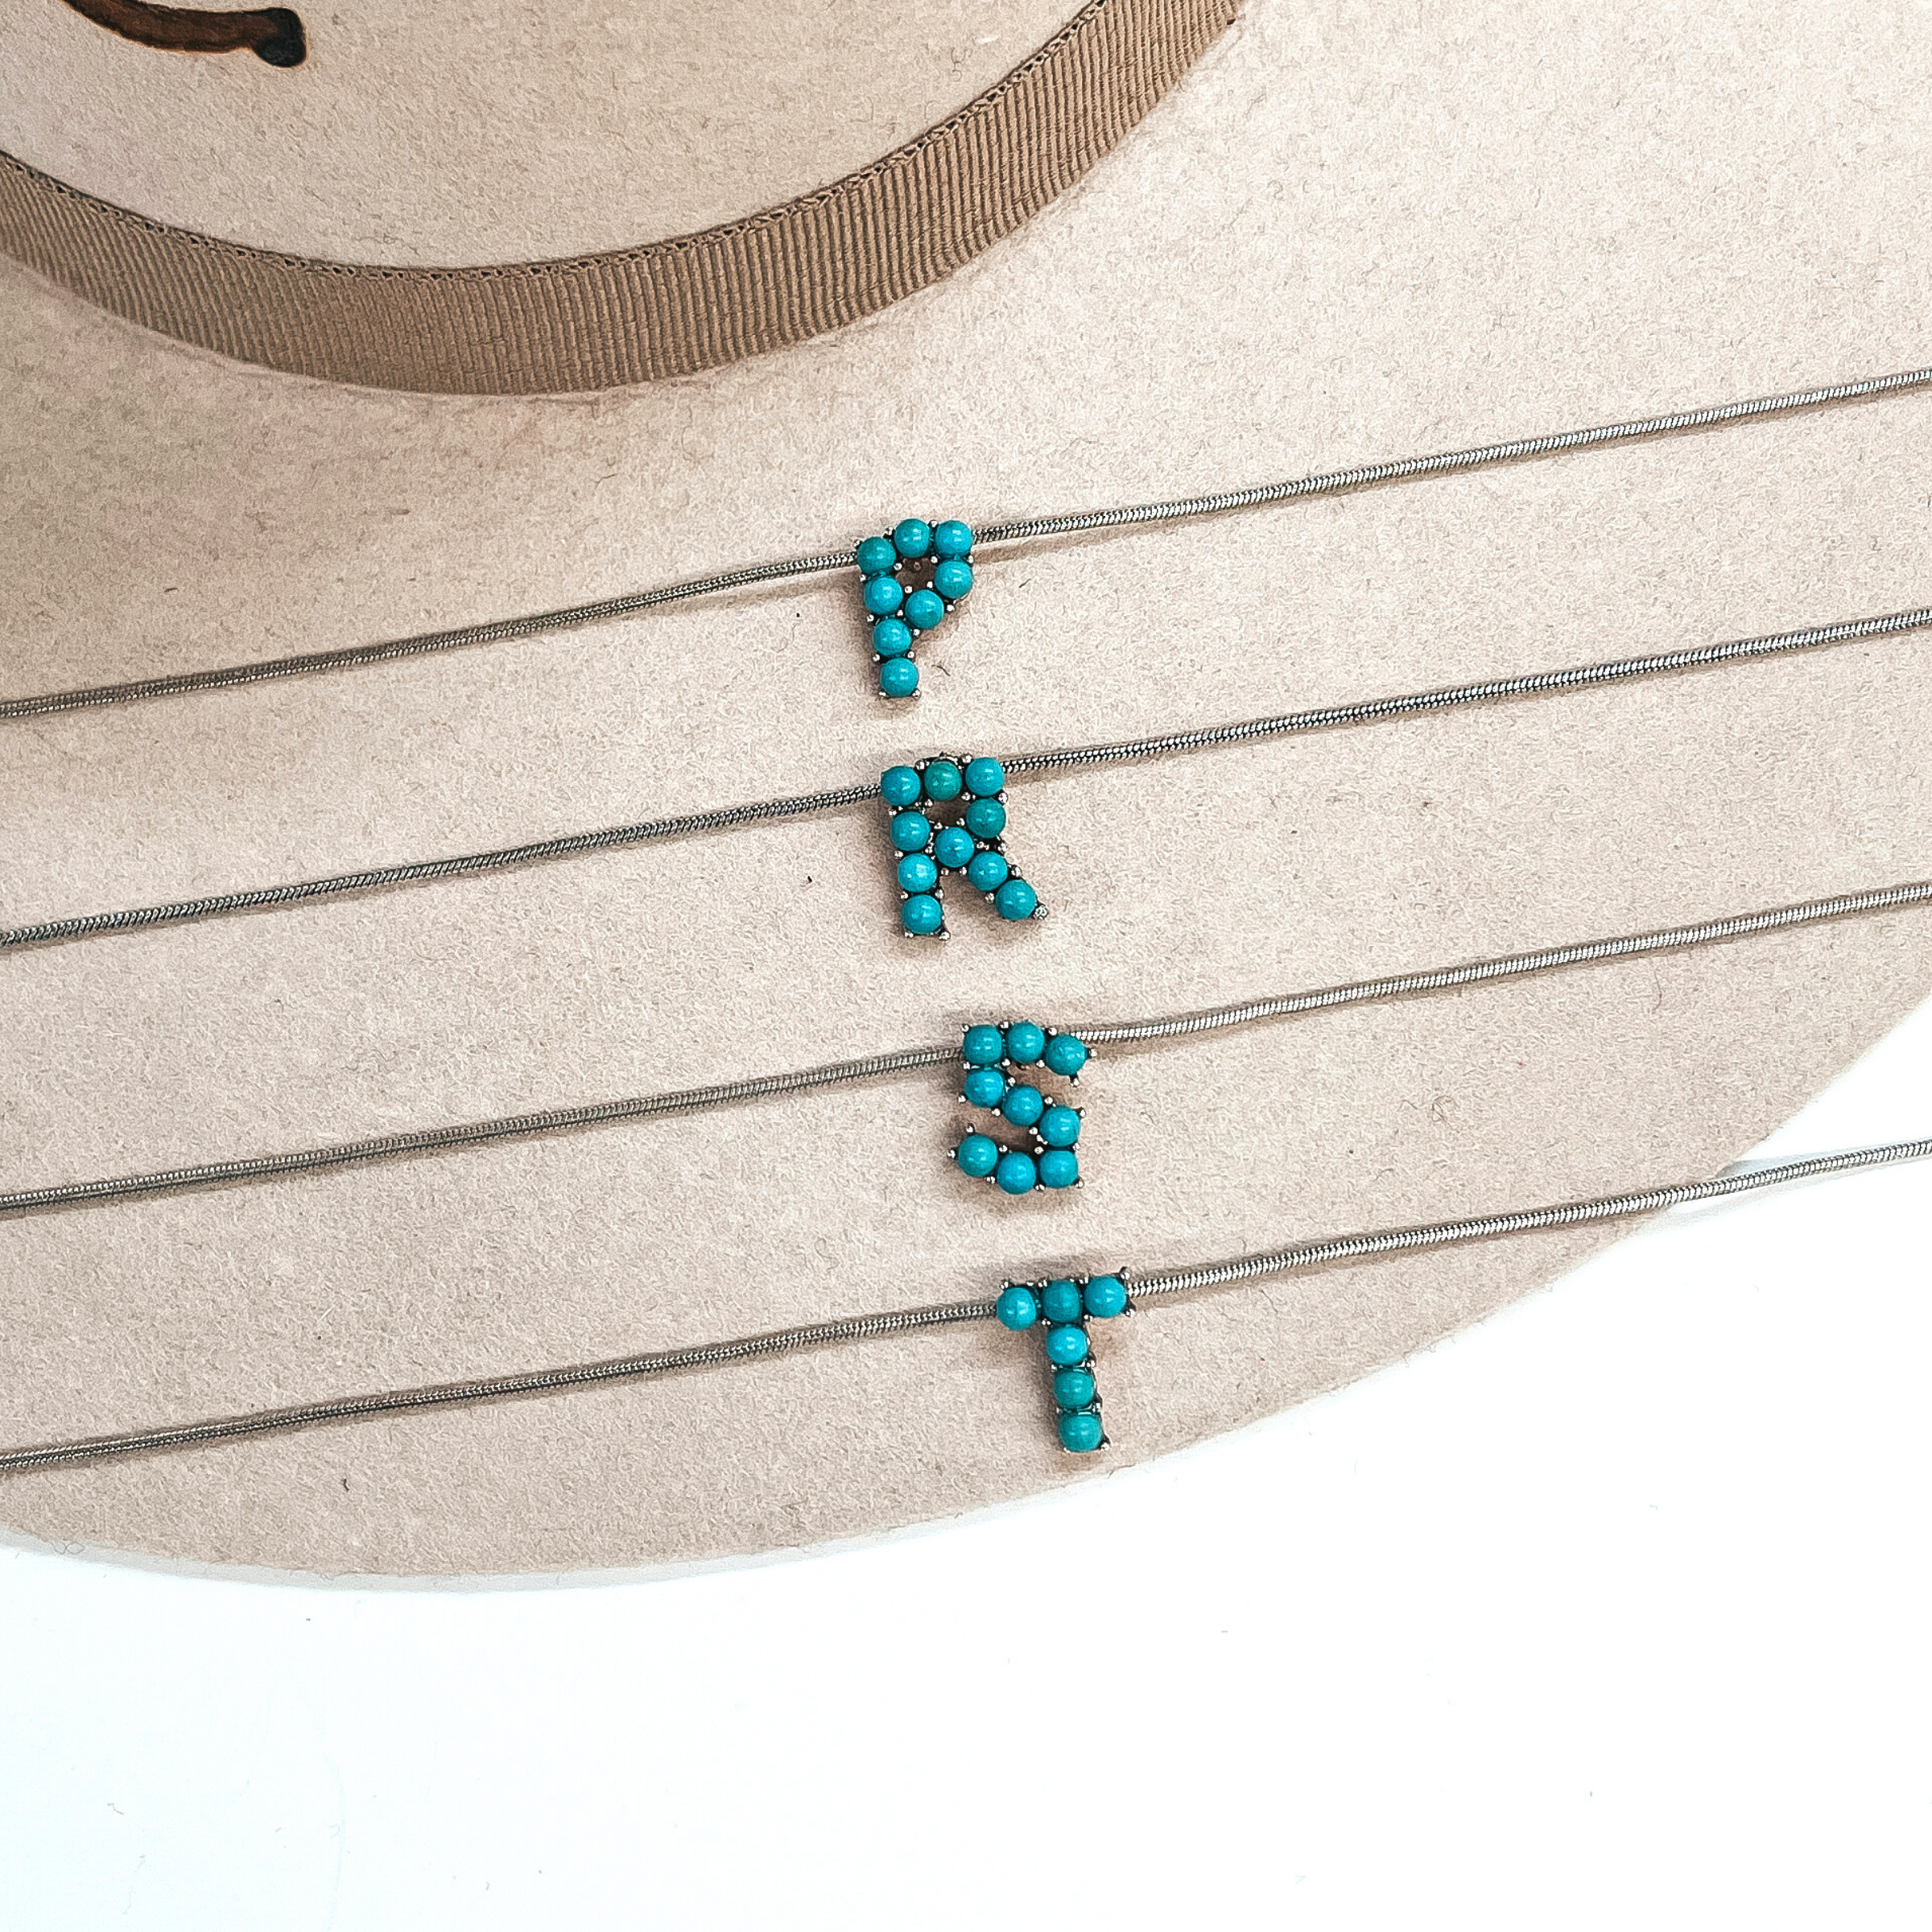 These are four turquoise stone initial necklaces with a thin, silver  snake chain. From top to bottom; P, R, S, T. These necklaces are taken  laying on a beige felt hat and on a white background.